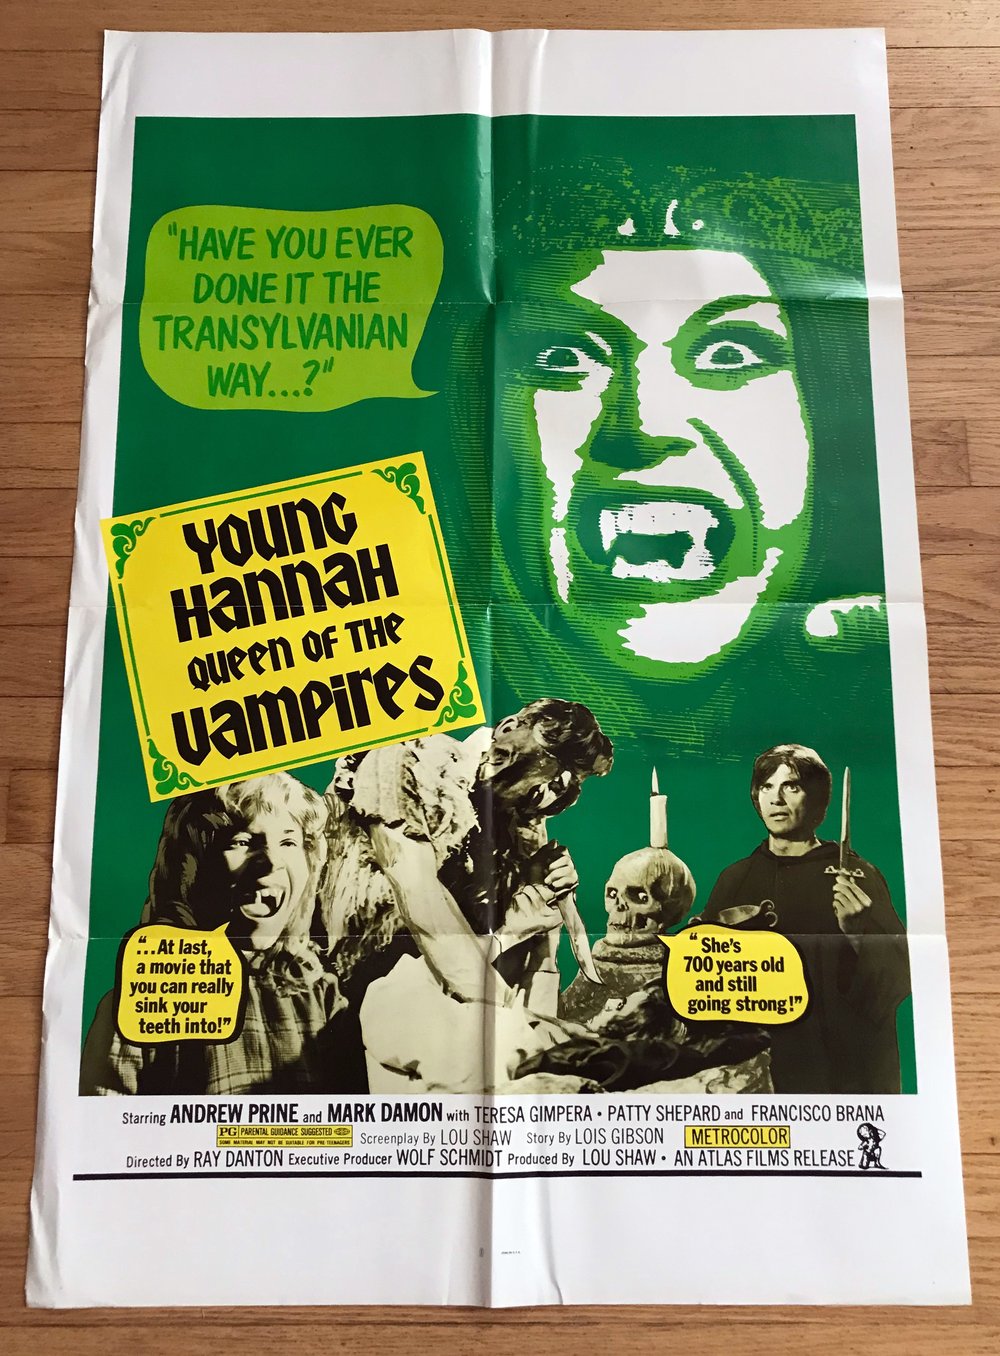 1973 HANNAH QUEEN OF THE VAMPIRES aka CRYPT OF THE LIVING DEAD Original U.S. One Sheet Movie Poster